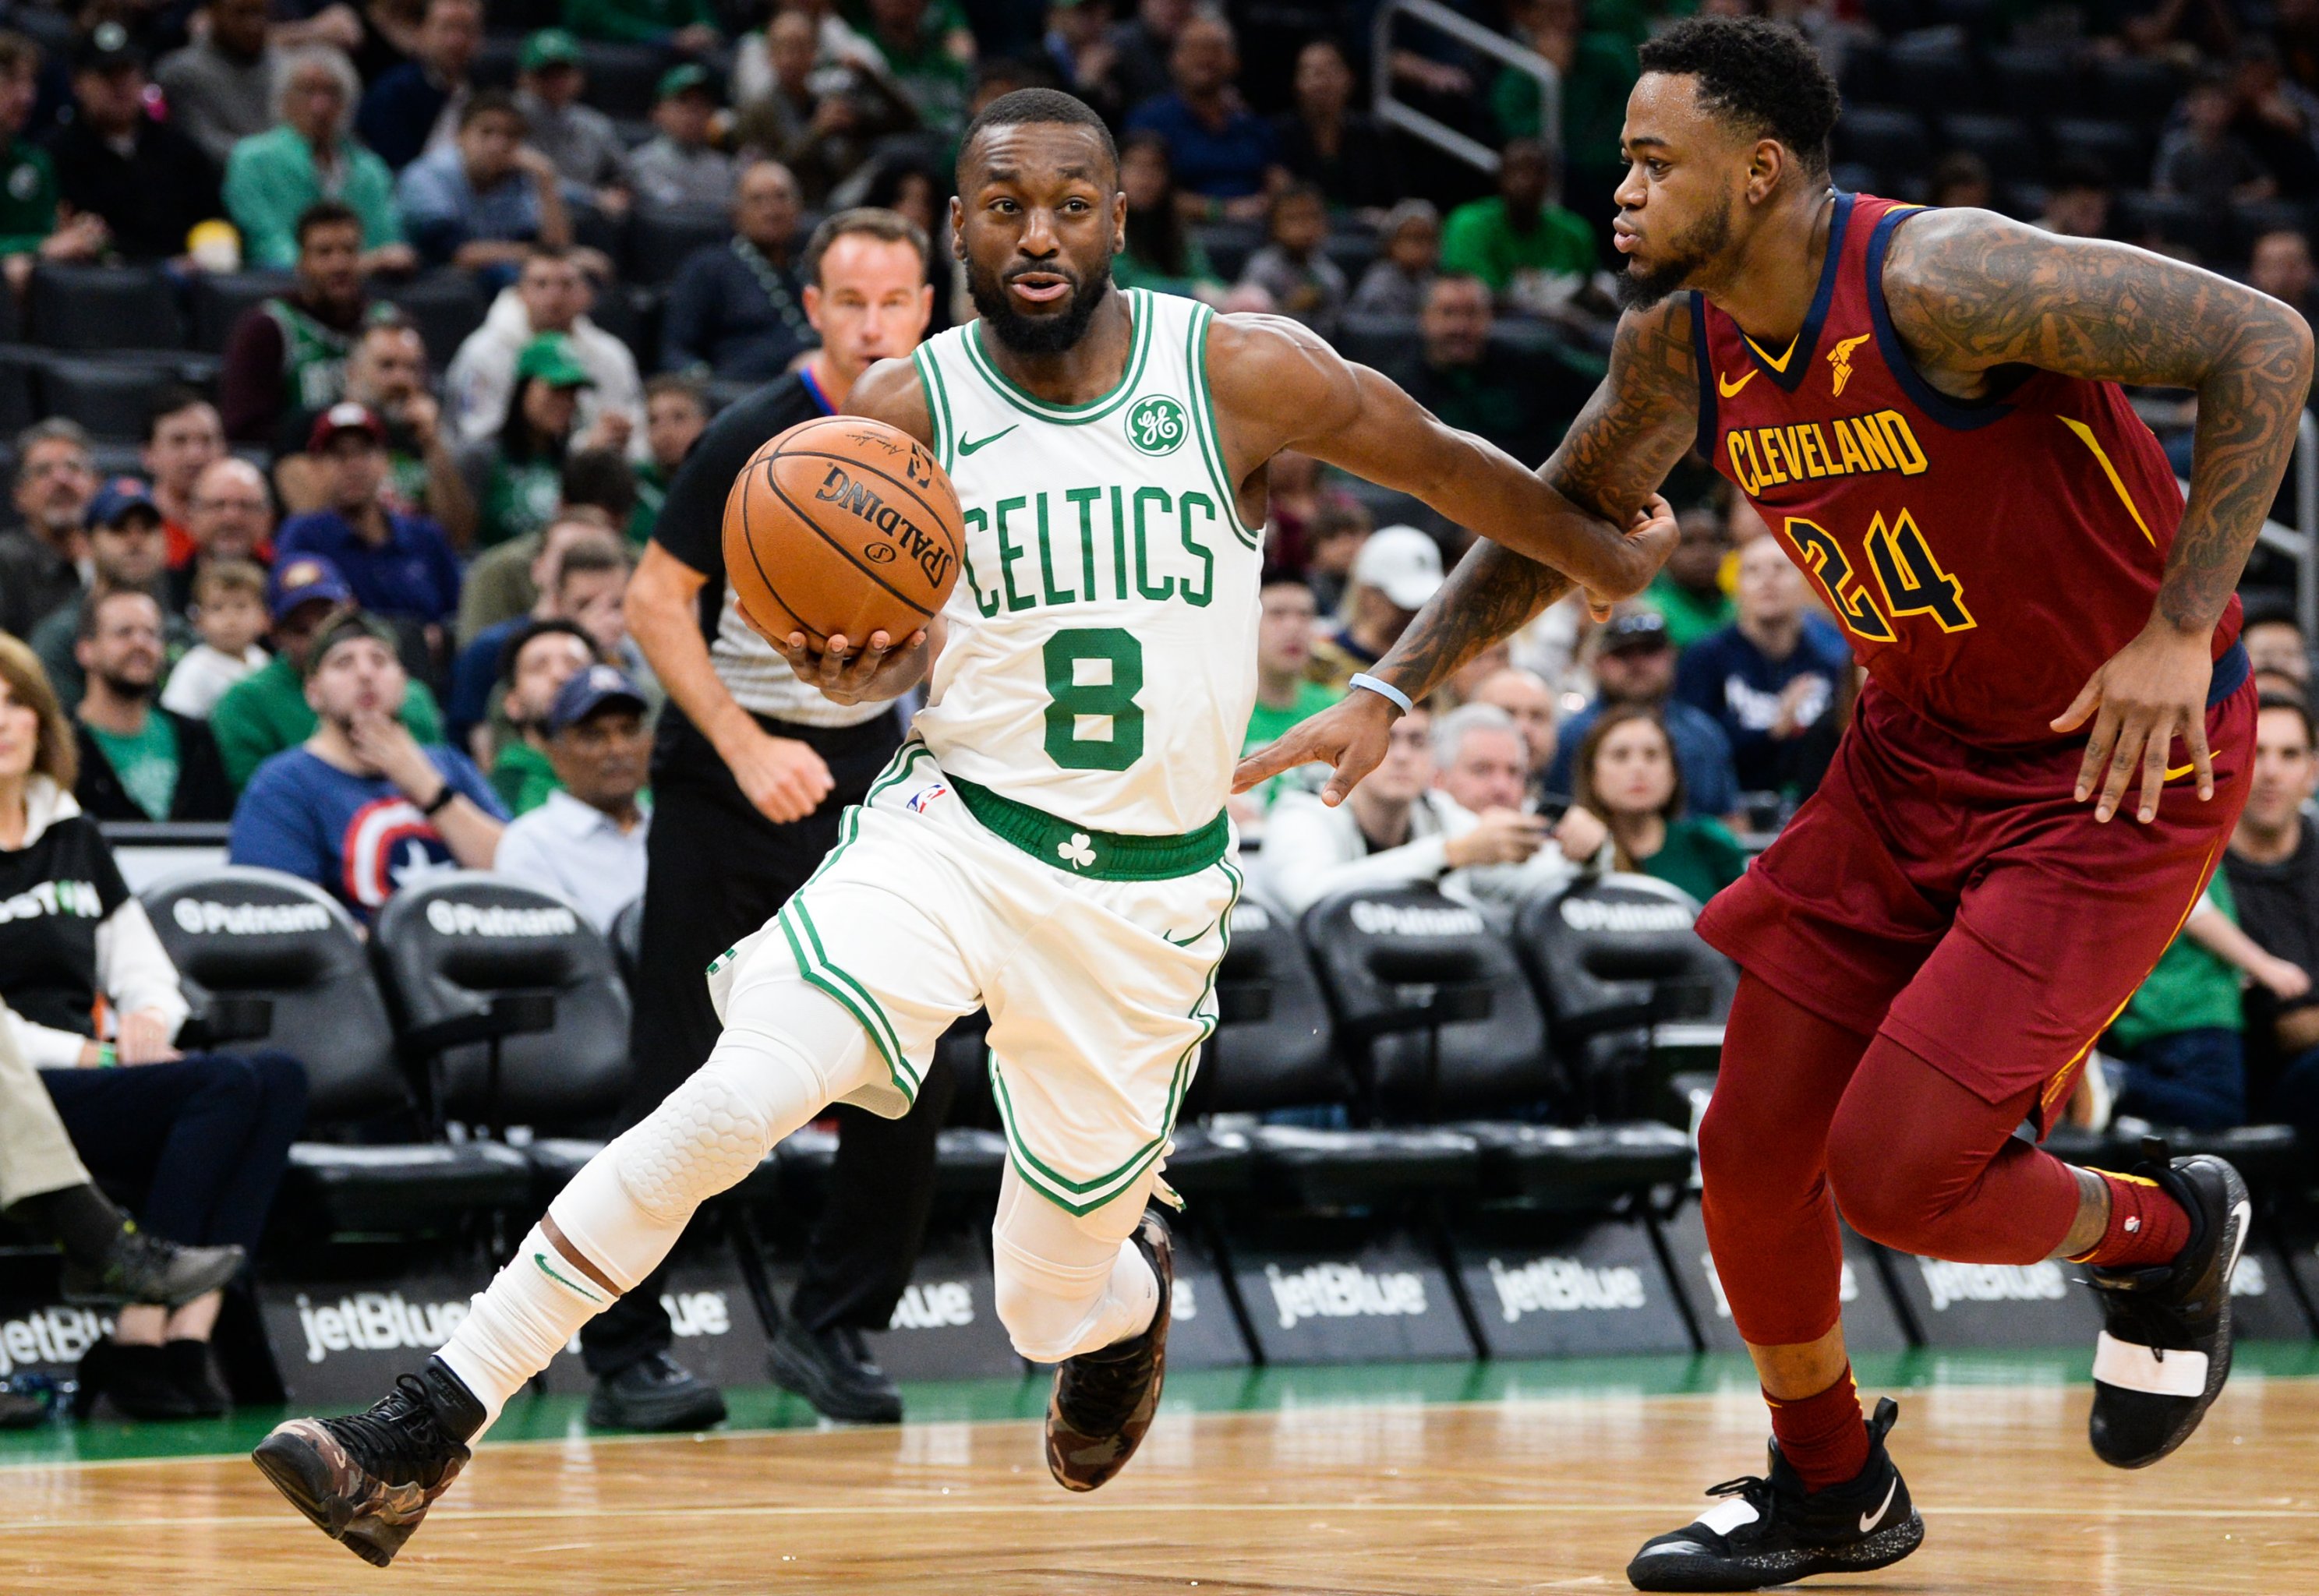 Kyrie Irving to Celtics Is Still Not Complete, So Rival Teams Are Looking  to Hijack the Deal